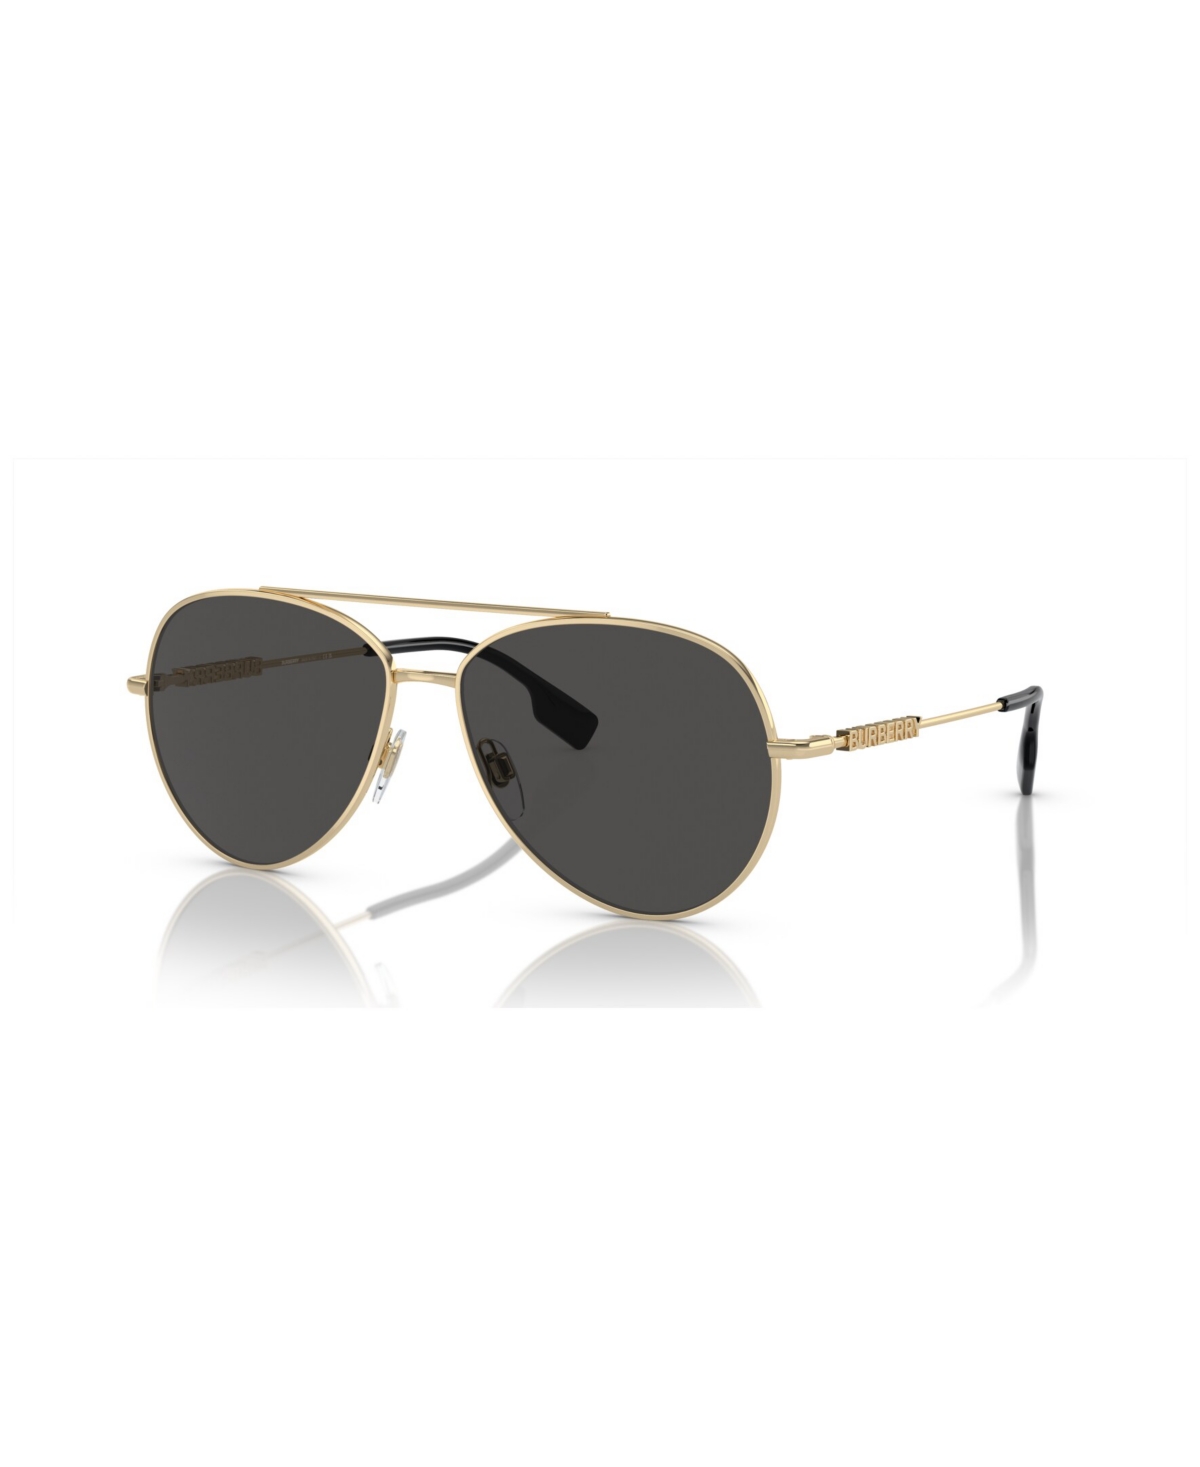 Burberry Women's Sunglasses, Gradient Be3147 In Gold